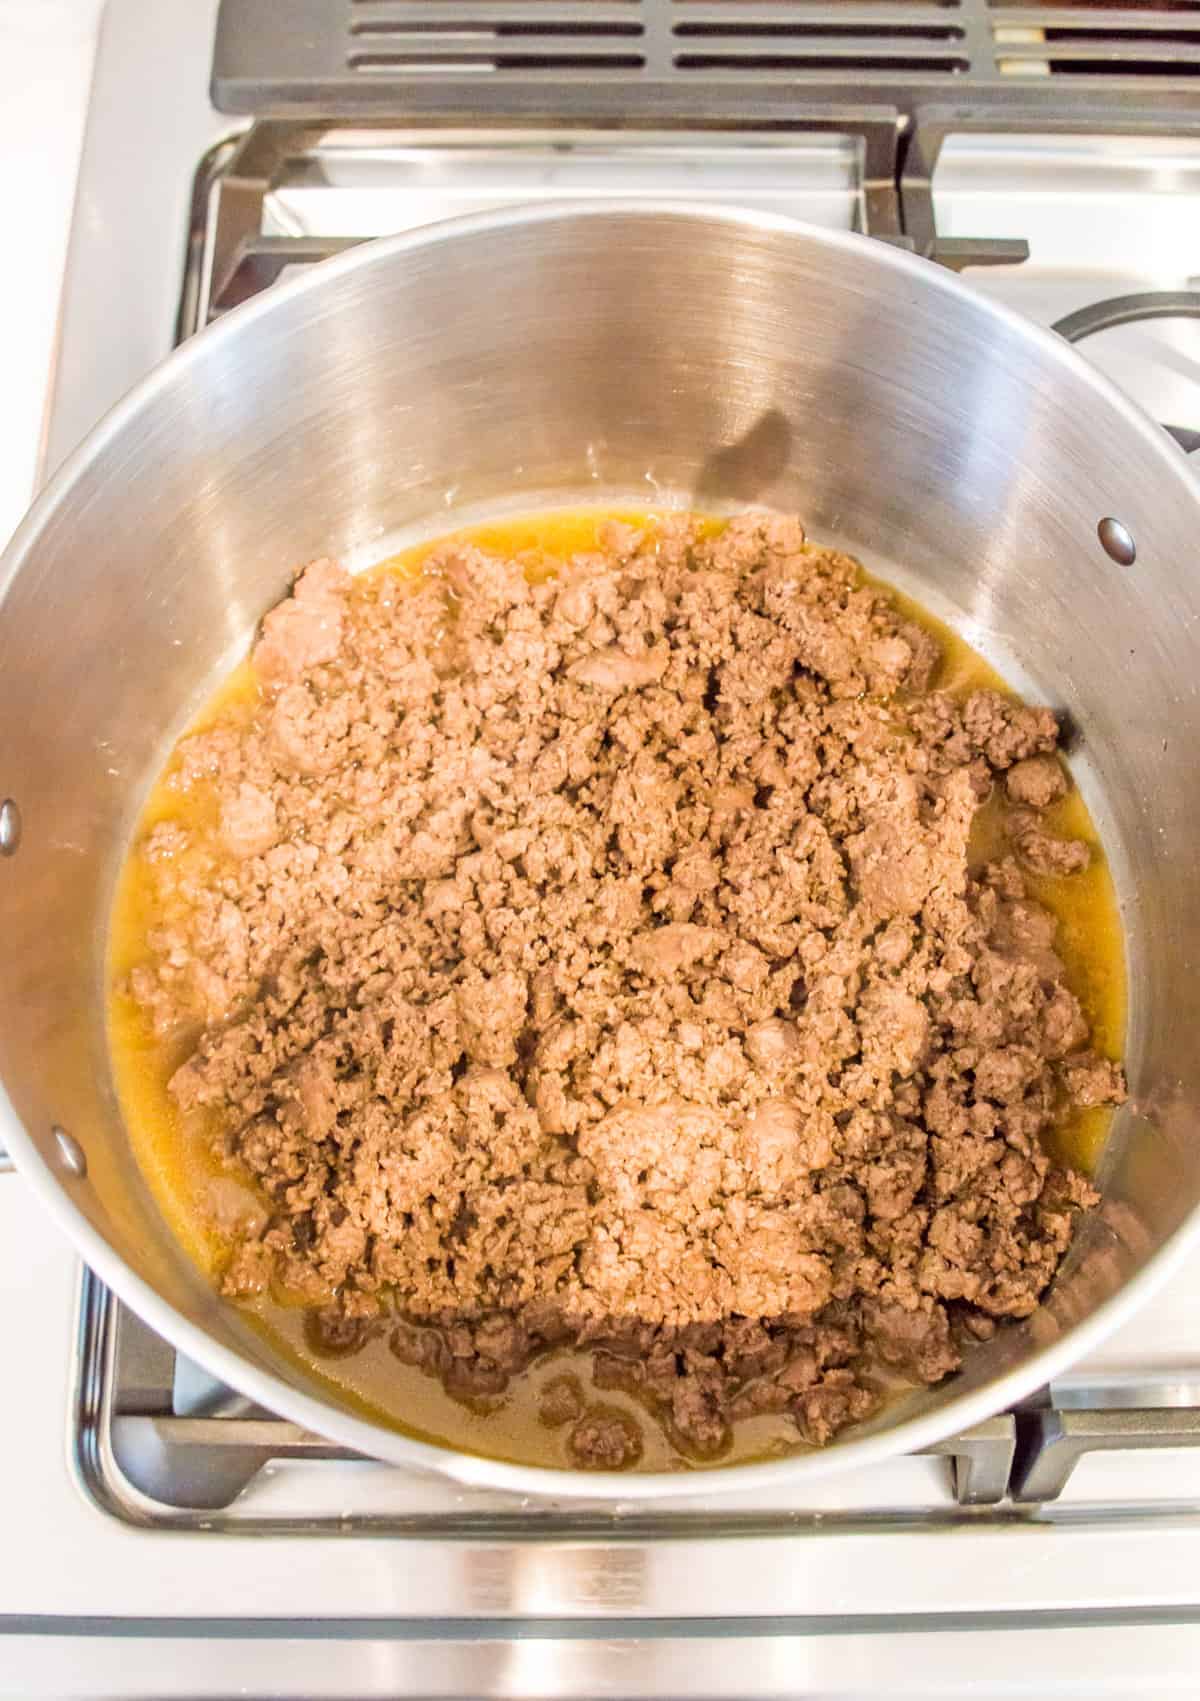 A pot full of cooked ground beef on the stovetop.